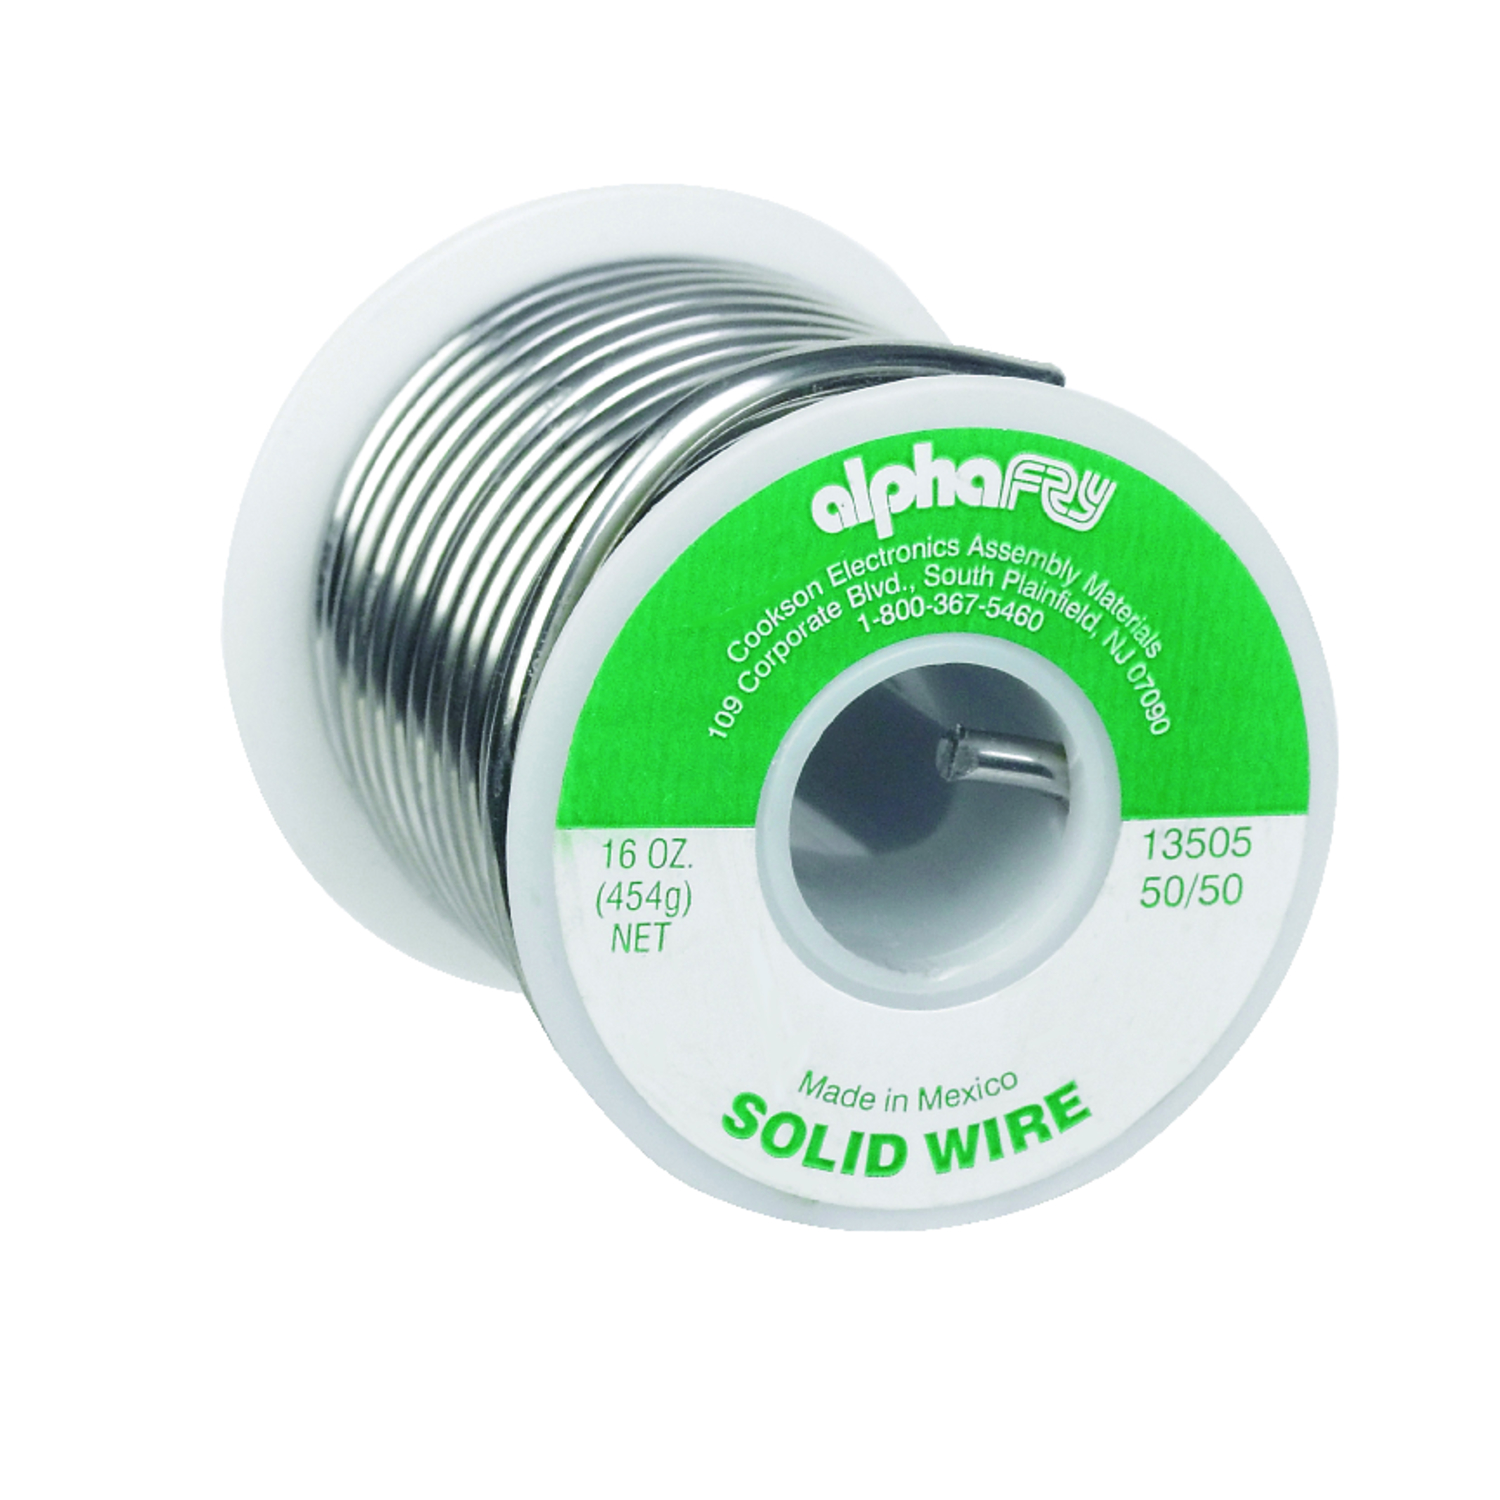 Alpha Fry 16 oz Solid Wire Solder 0.125 in. D Tin/Lead 50/50 1 pc